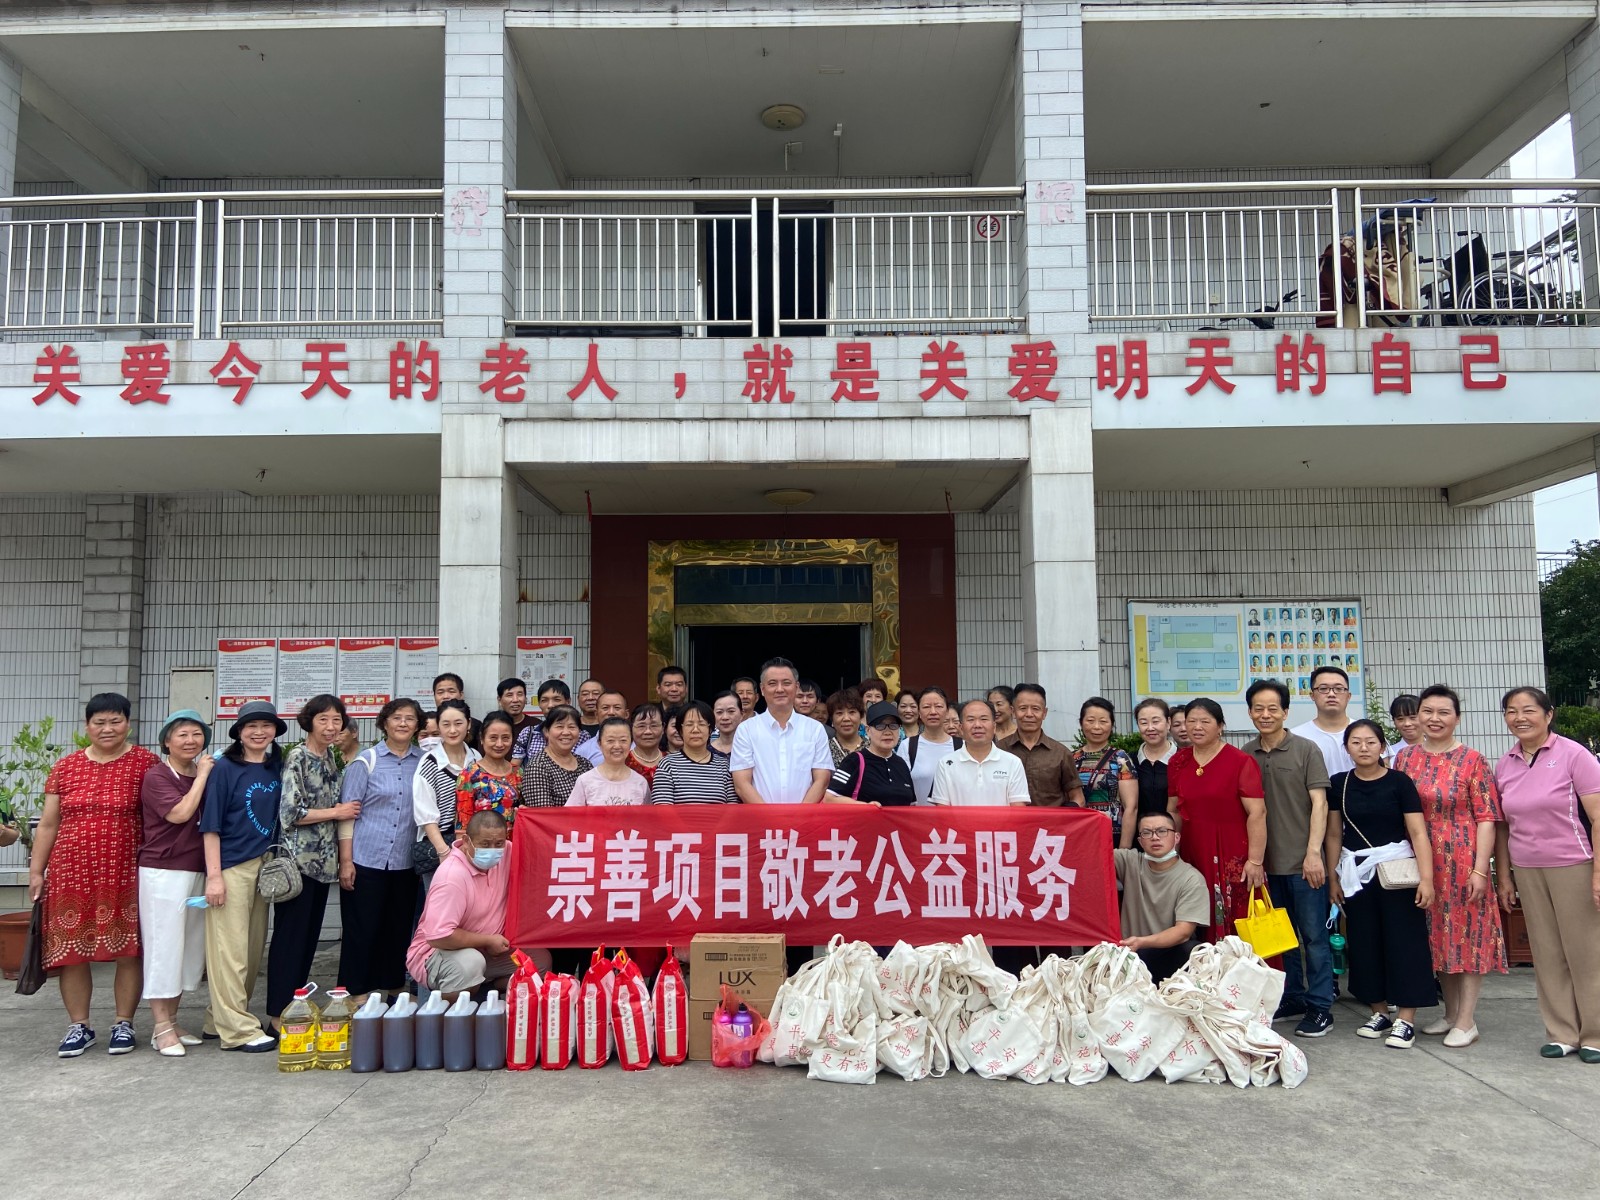 The Changzhou Chongshan Fund in Jiangsu, affiliated with the Amity Foundation, held a charity event at a local nursing home in the Xinbei District, Changzhou City, Jiangsu Province on July 15, 2023